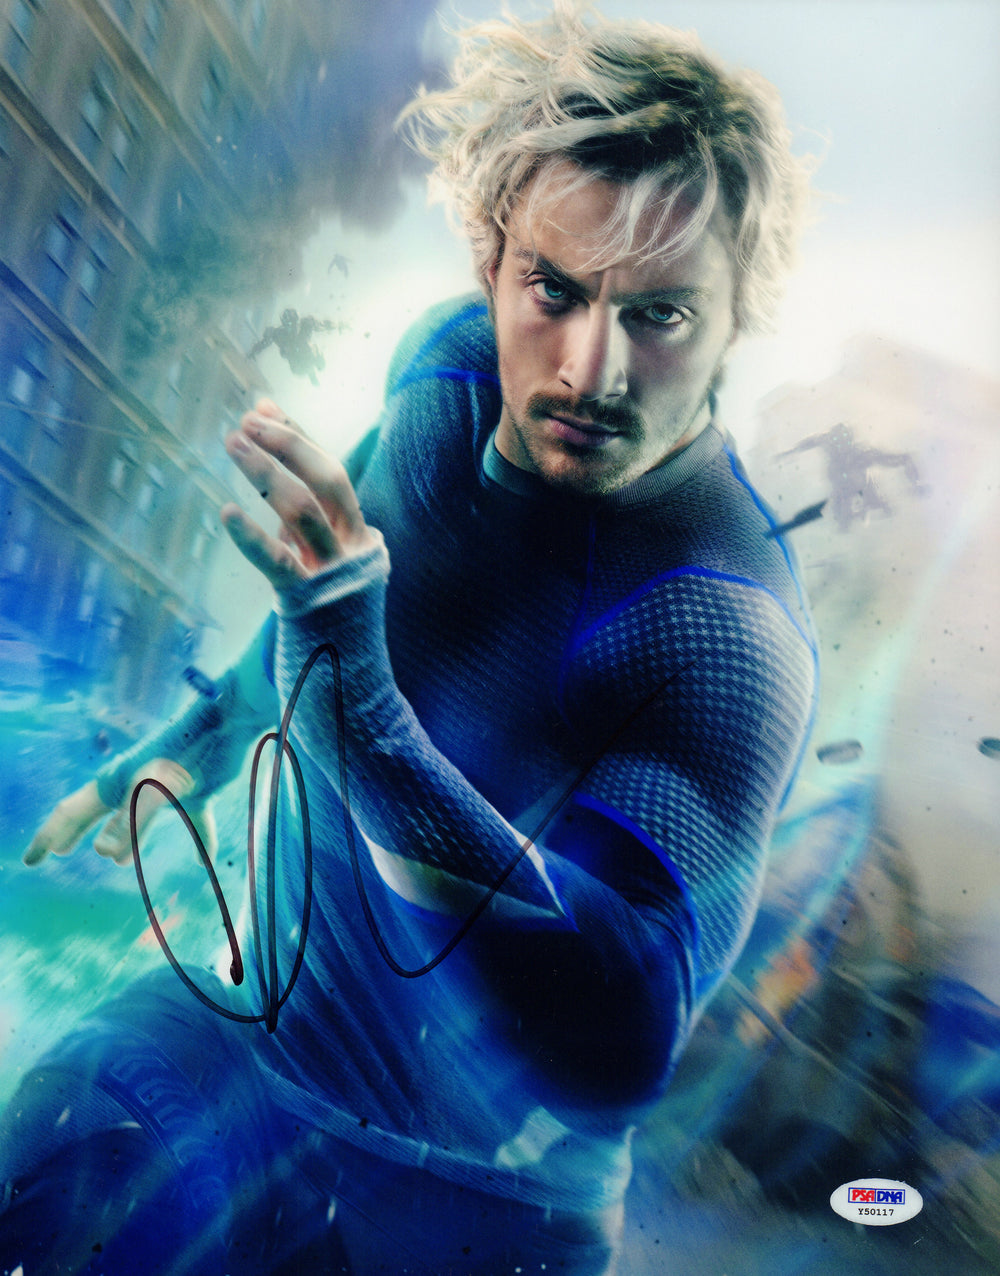 Aaron Taylor-Johnson as Quicksilver in Avengers: Age of Ultron Signed 11x14 Photo